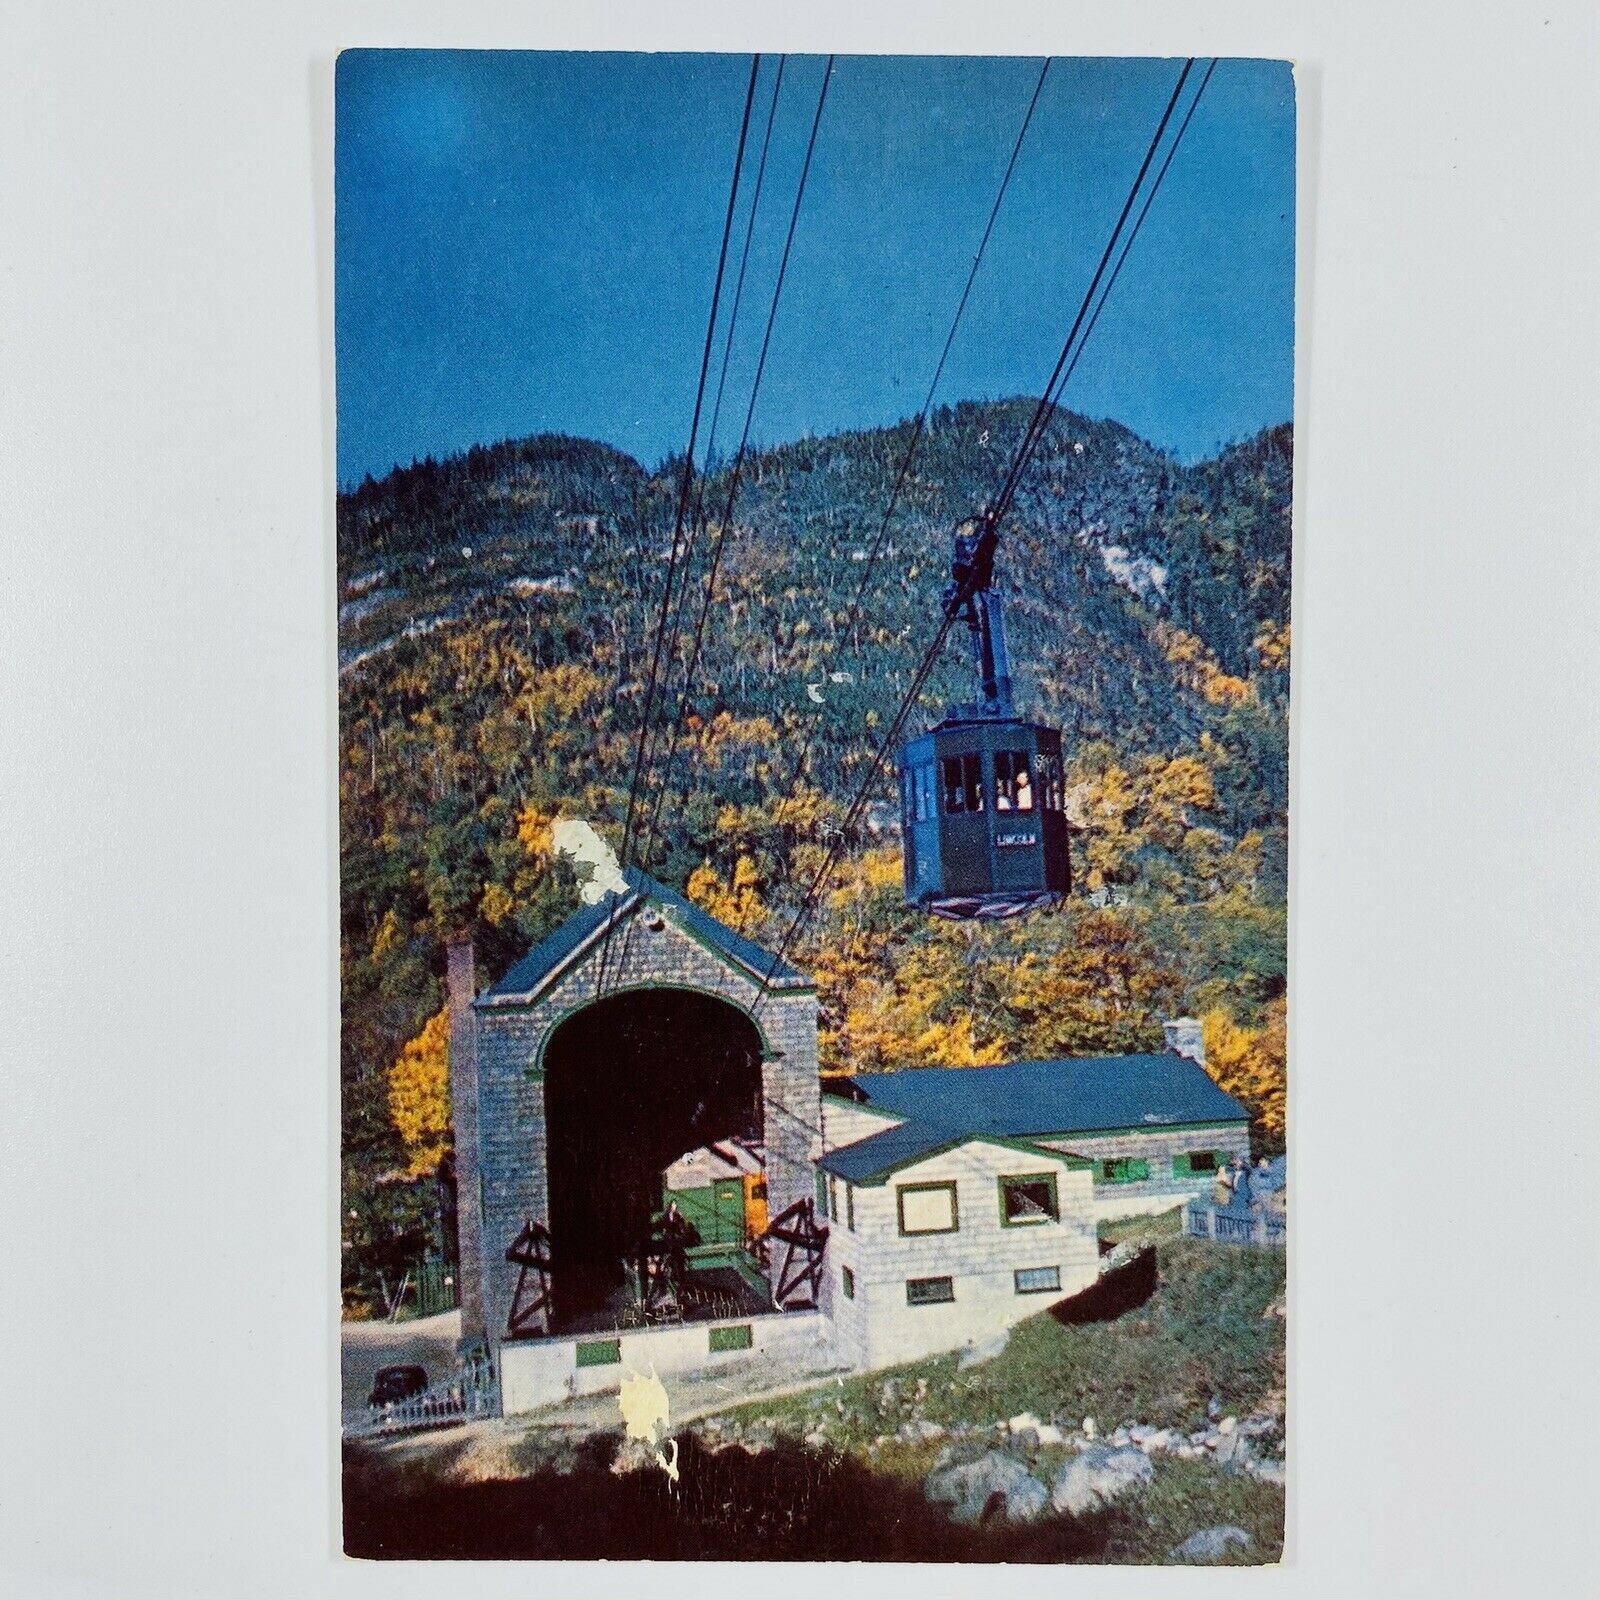 New Hampshire Nh Cannon Mountain Passenger Tramway Postcard Old Vintage Card Pc